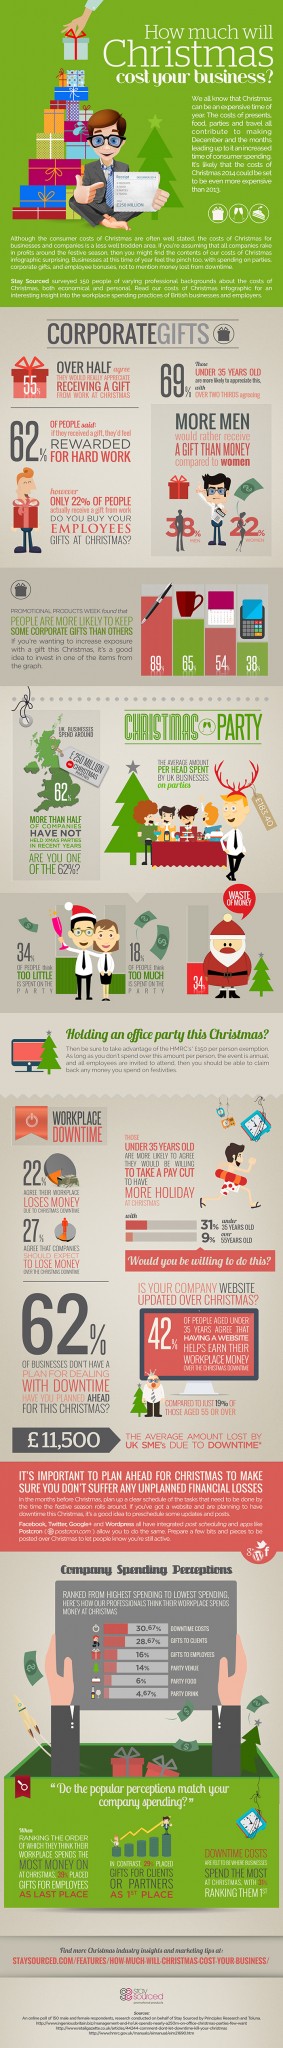 How much will Christmas cost your business 